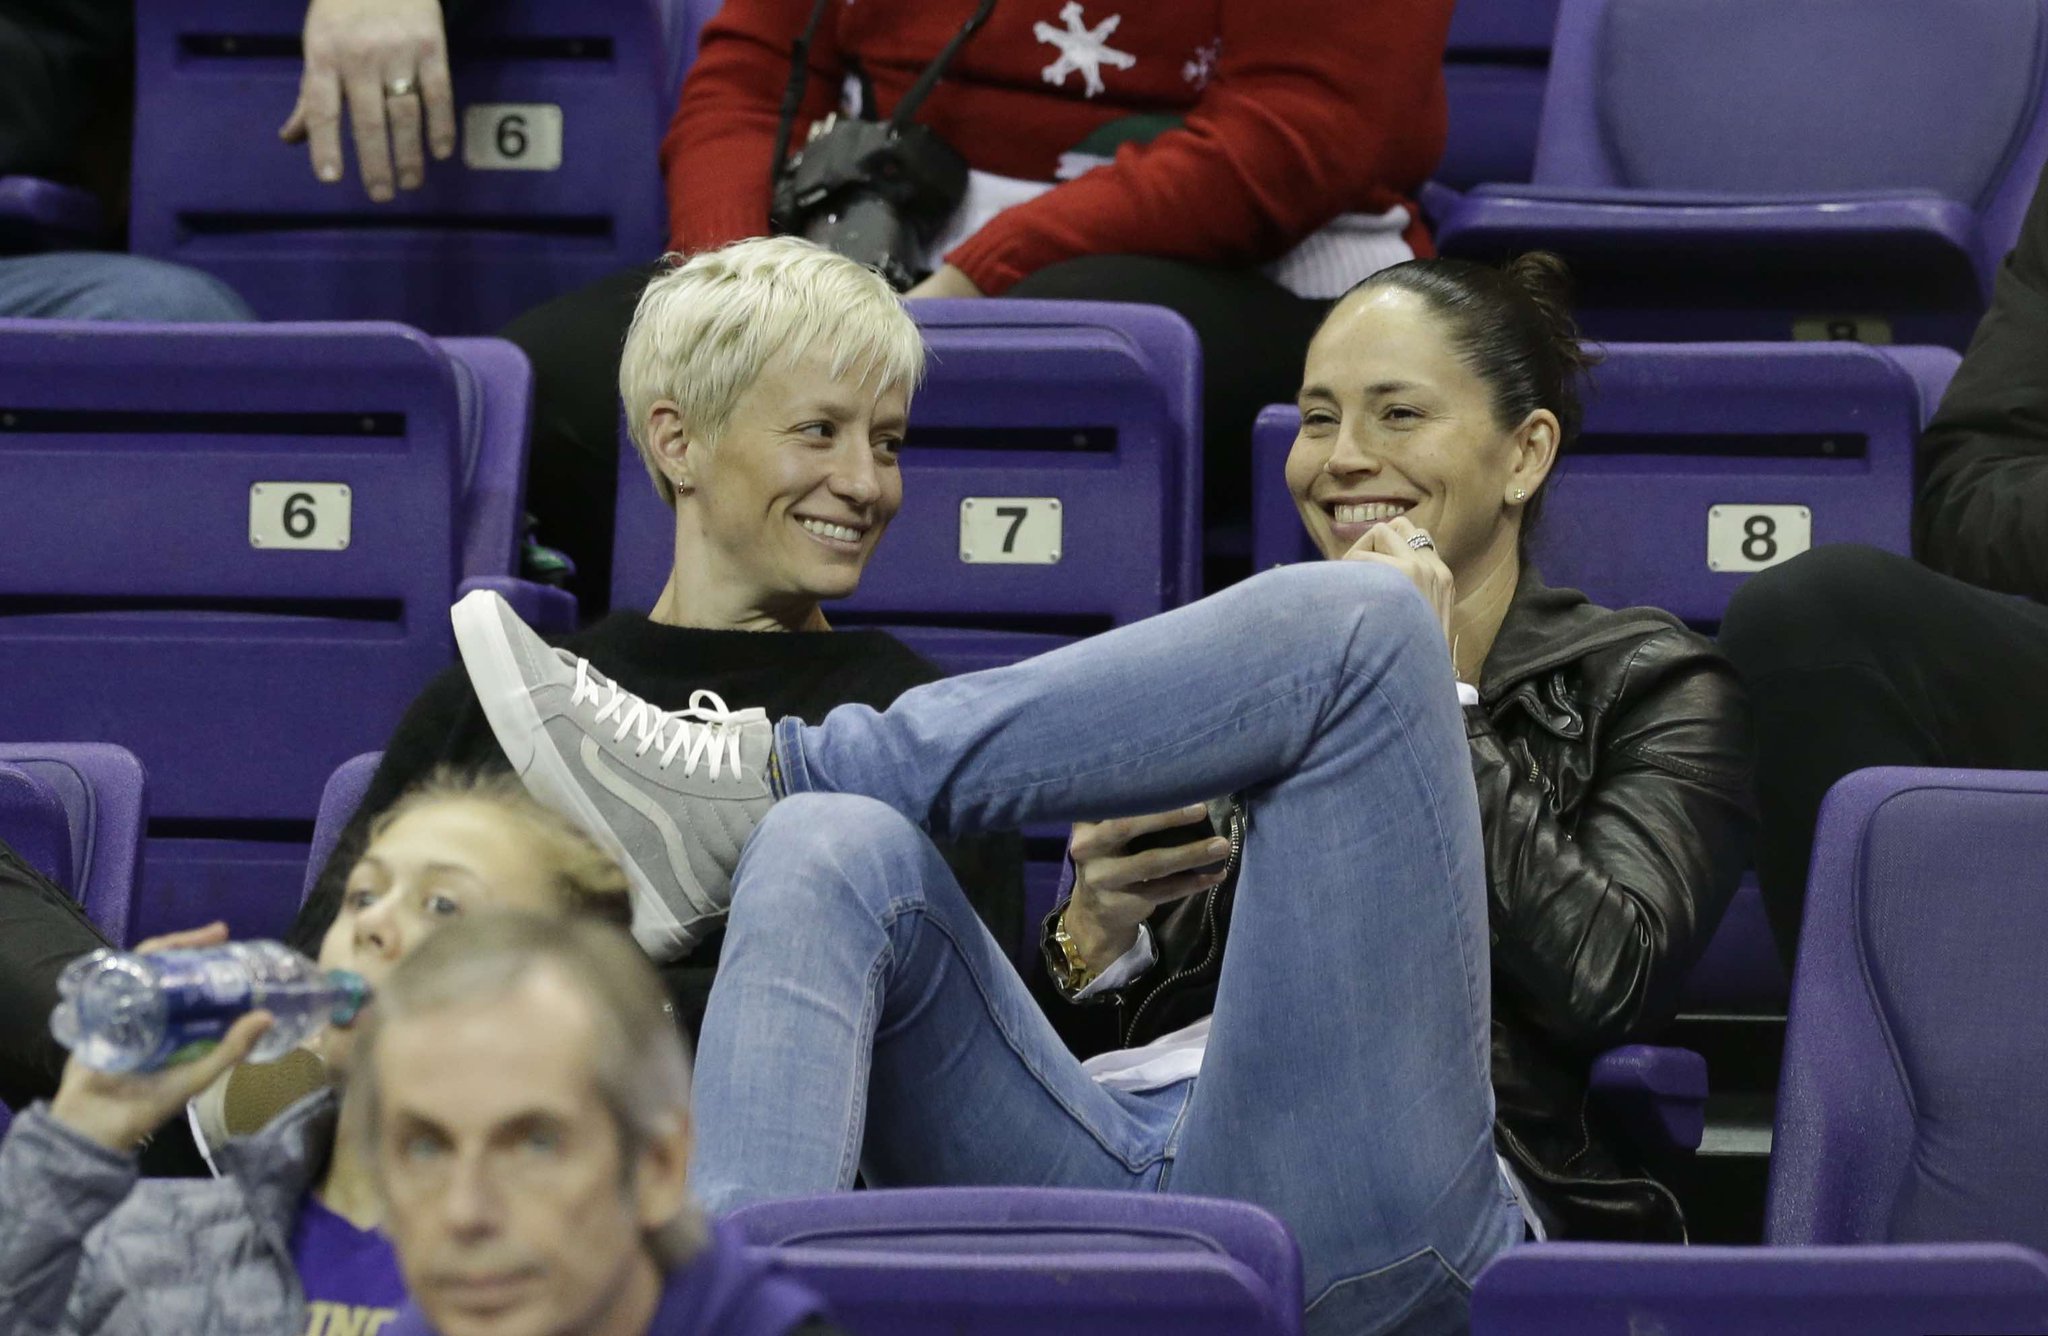 “Storm guard Sue Bird comes out as gay, reveals relationship with USWNT sta...